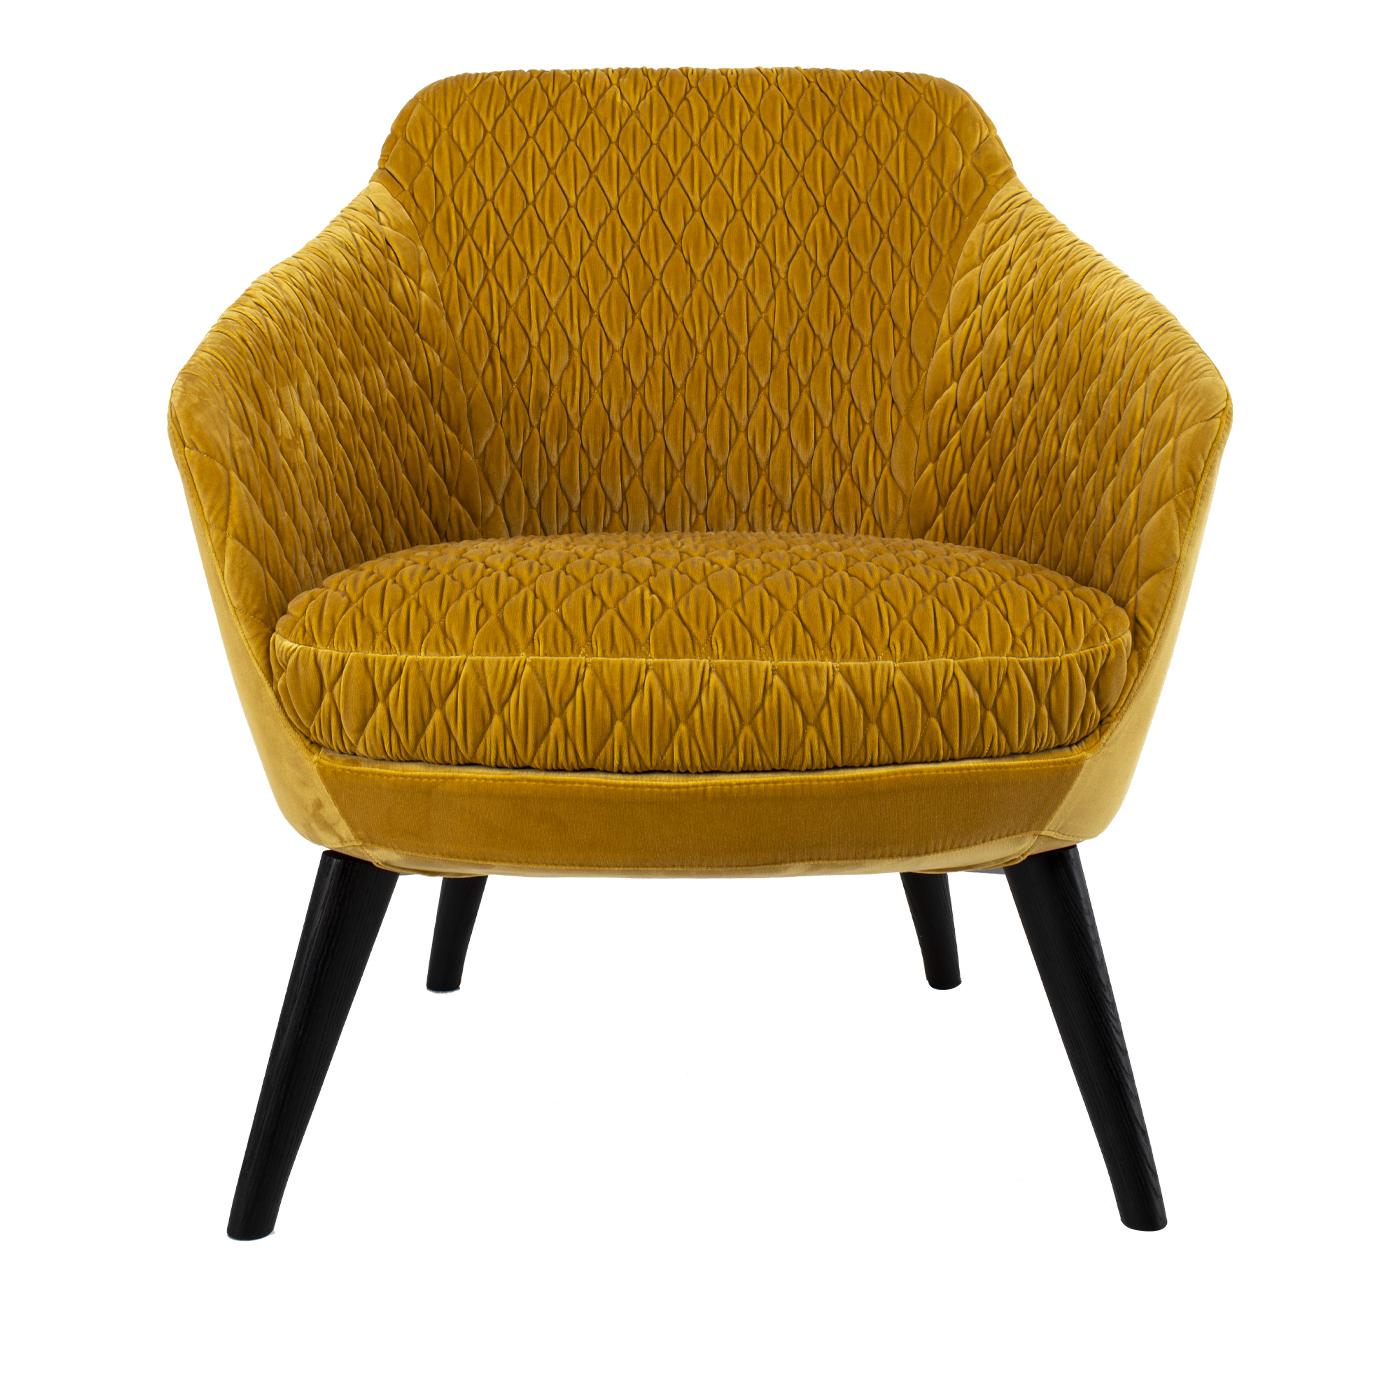 Loosen up and relax on the luxurious Katy armchair. The backrest and the seat cushion are covered in finely embroidered mustard yellow velvet, and the chair is supported by four black angled tapered metal legs. This versatile and unique product is